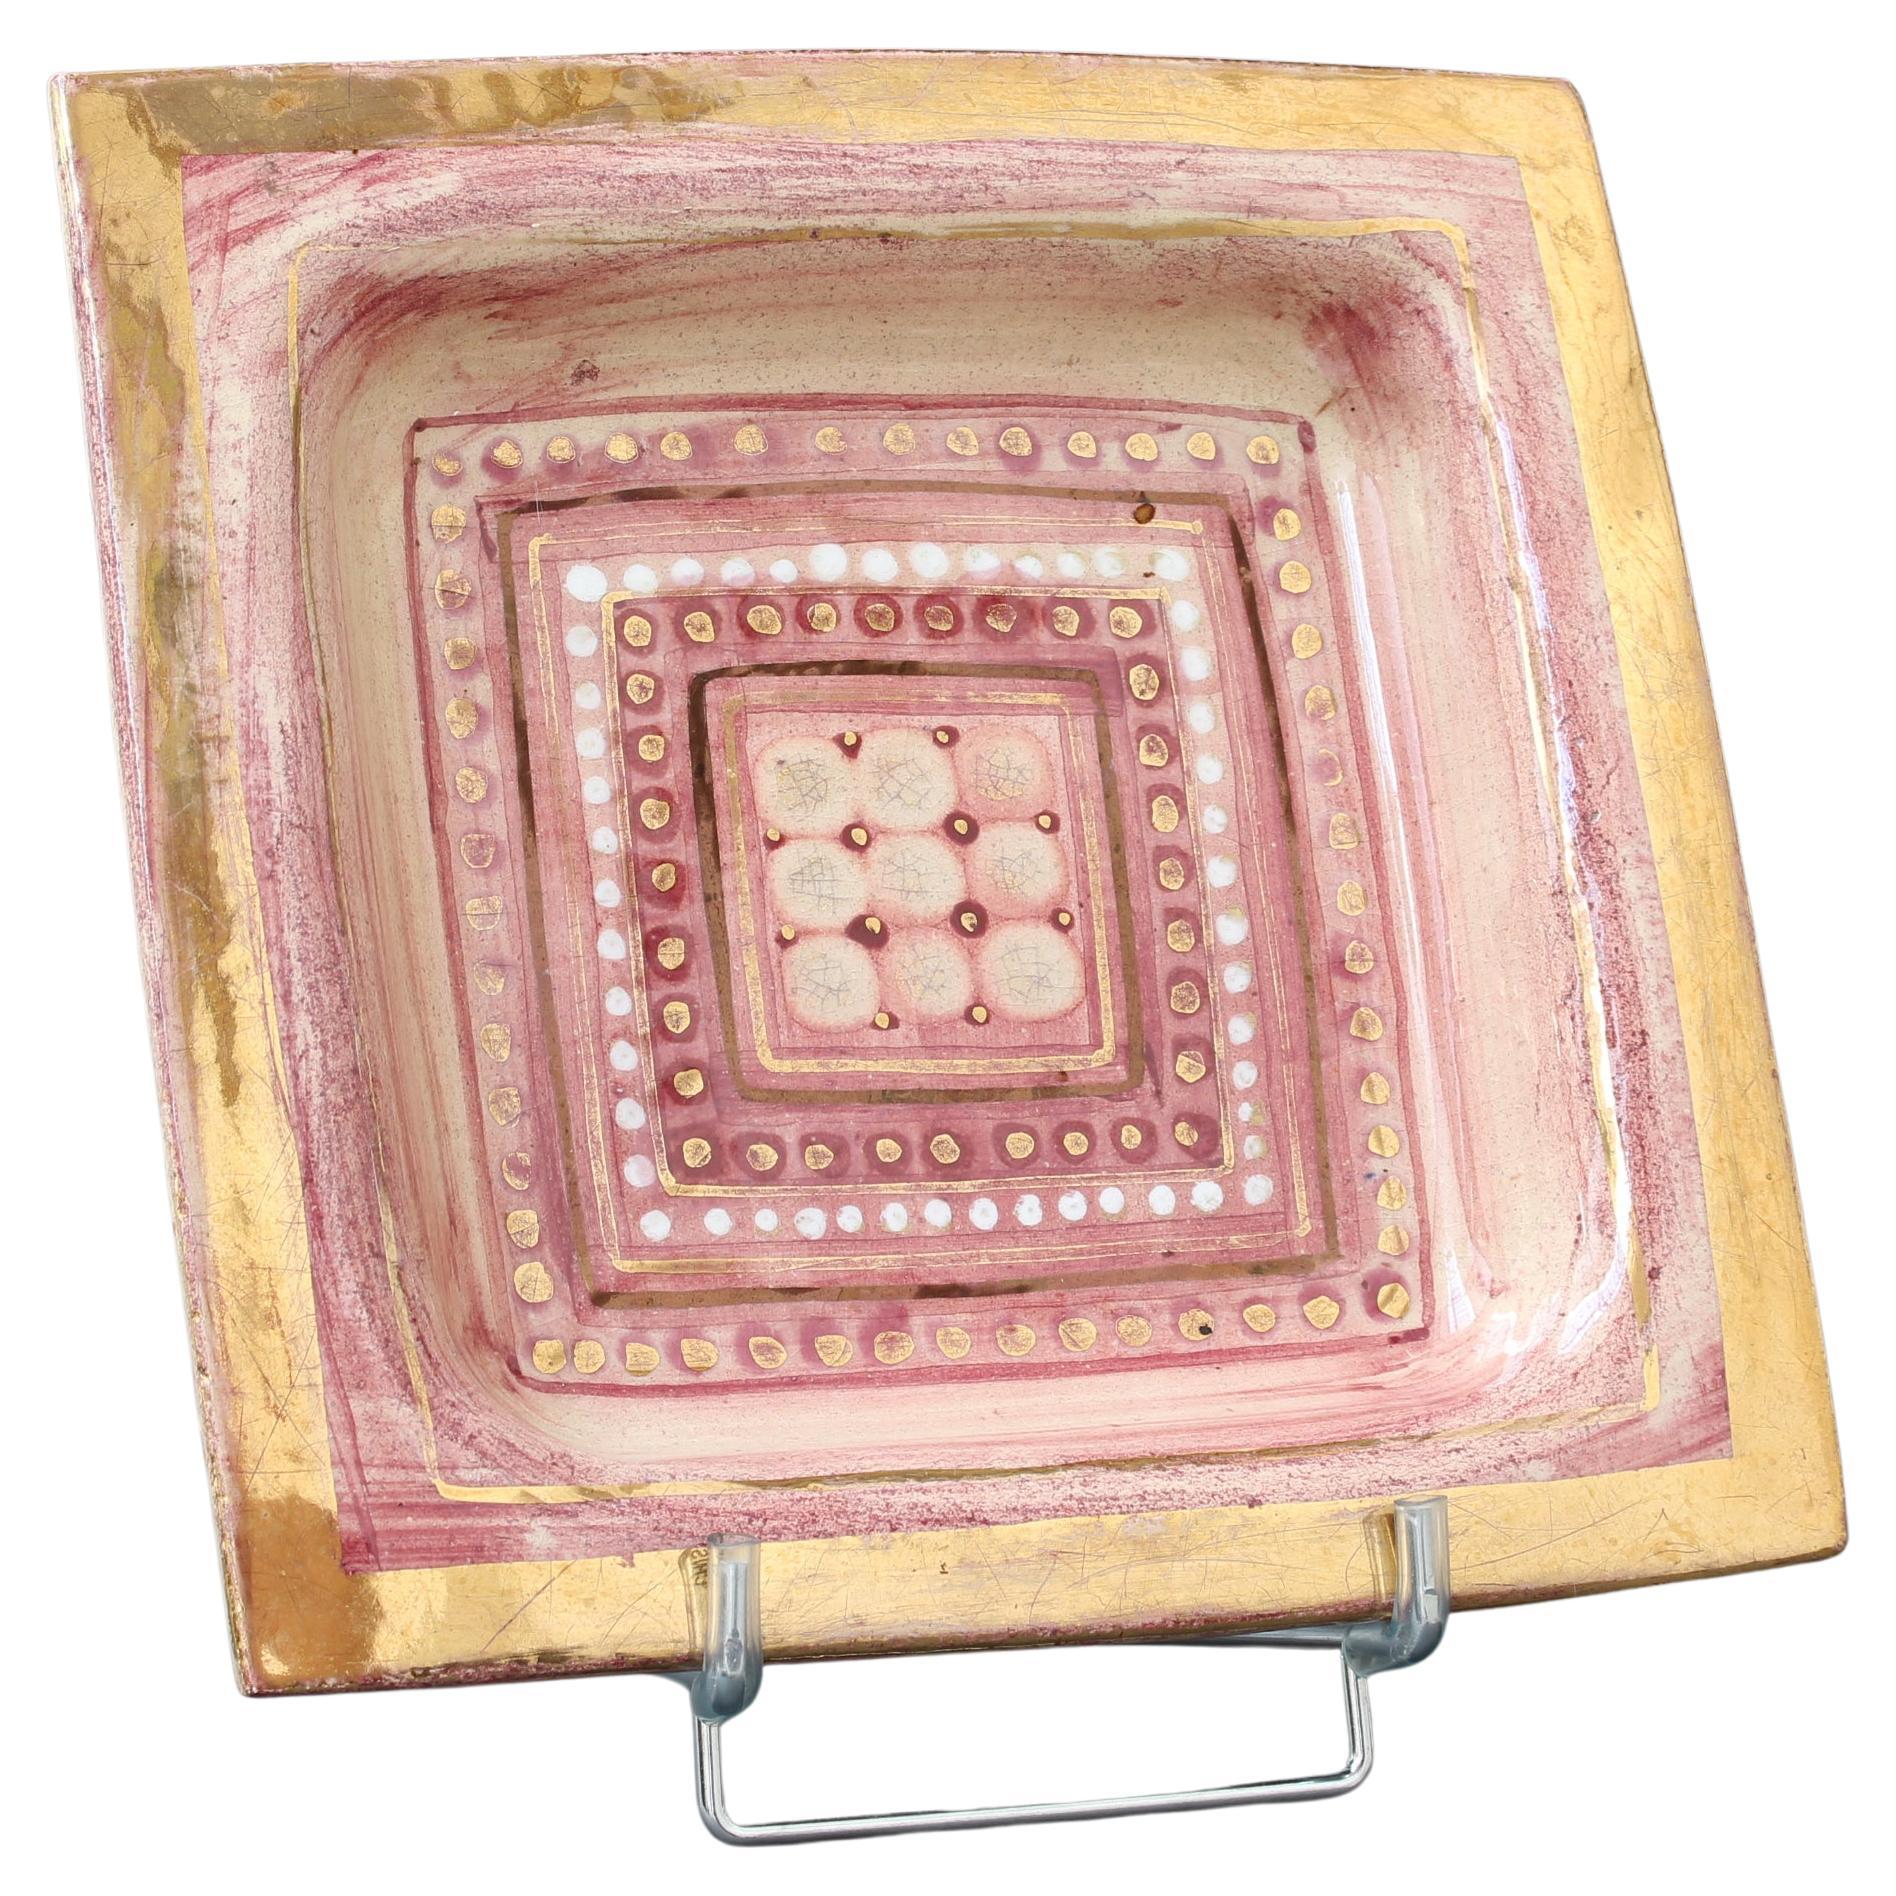 French vintage decorative tray / vide-poche by ceramicist Georges Pelletier (circa 1970s). Hand painted, large ceramic tray also suitable for wall hanging. The piece has brushed, rose-coloured highlights and gold-lustre edging. The sunken base of